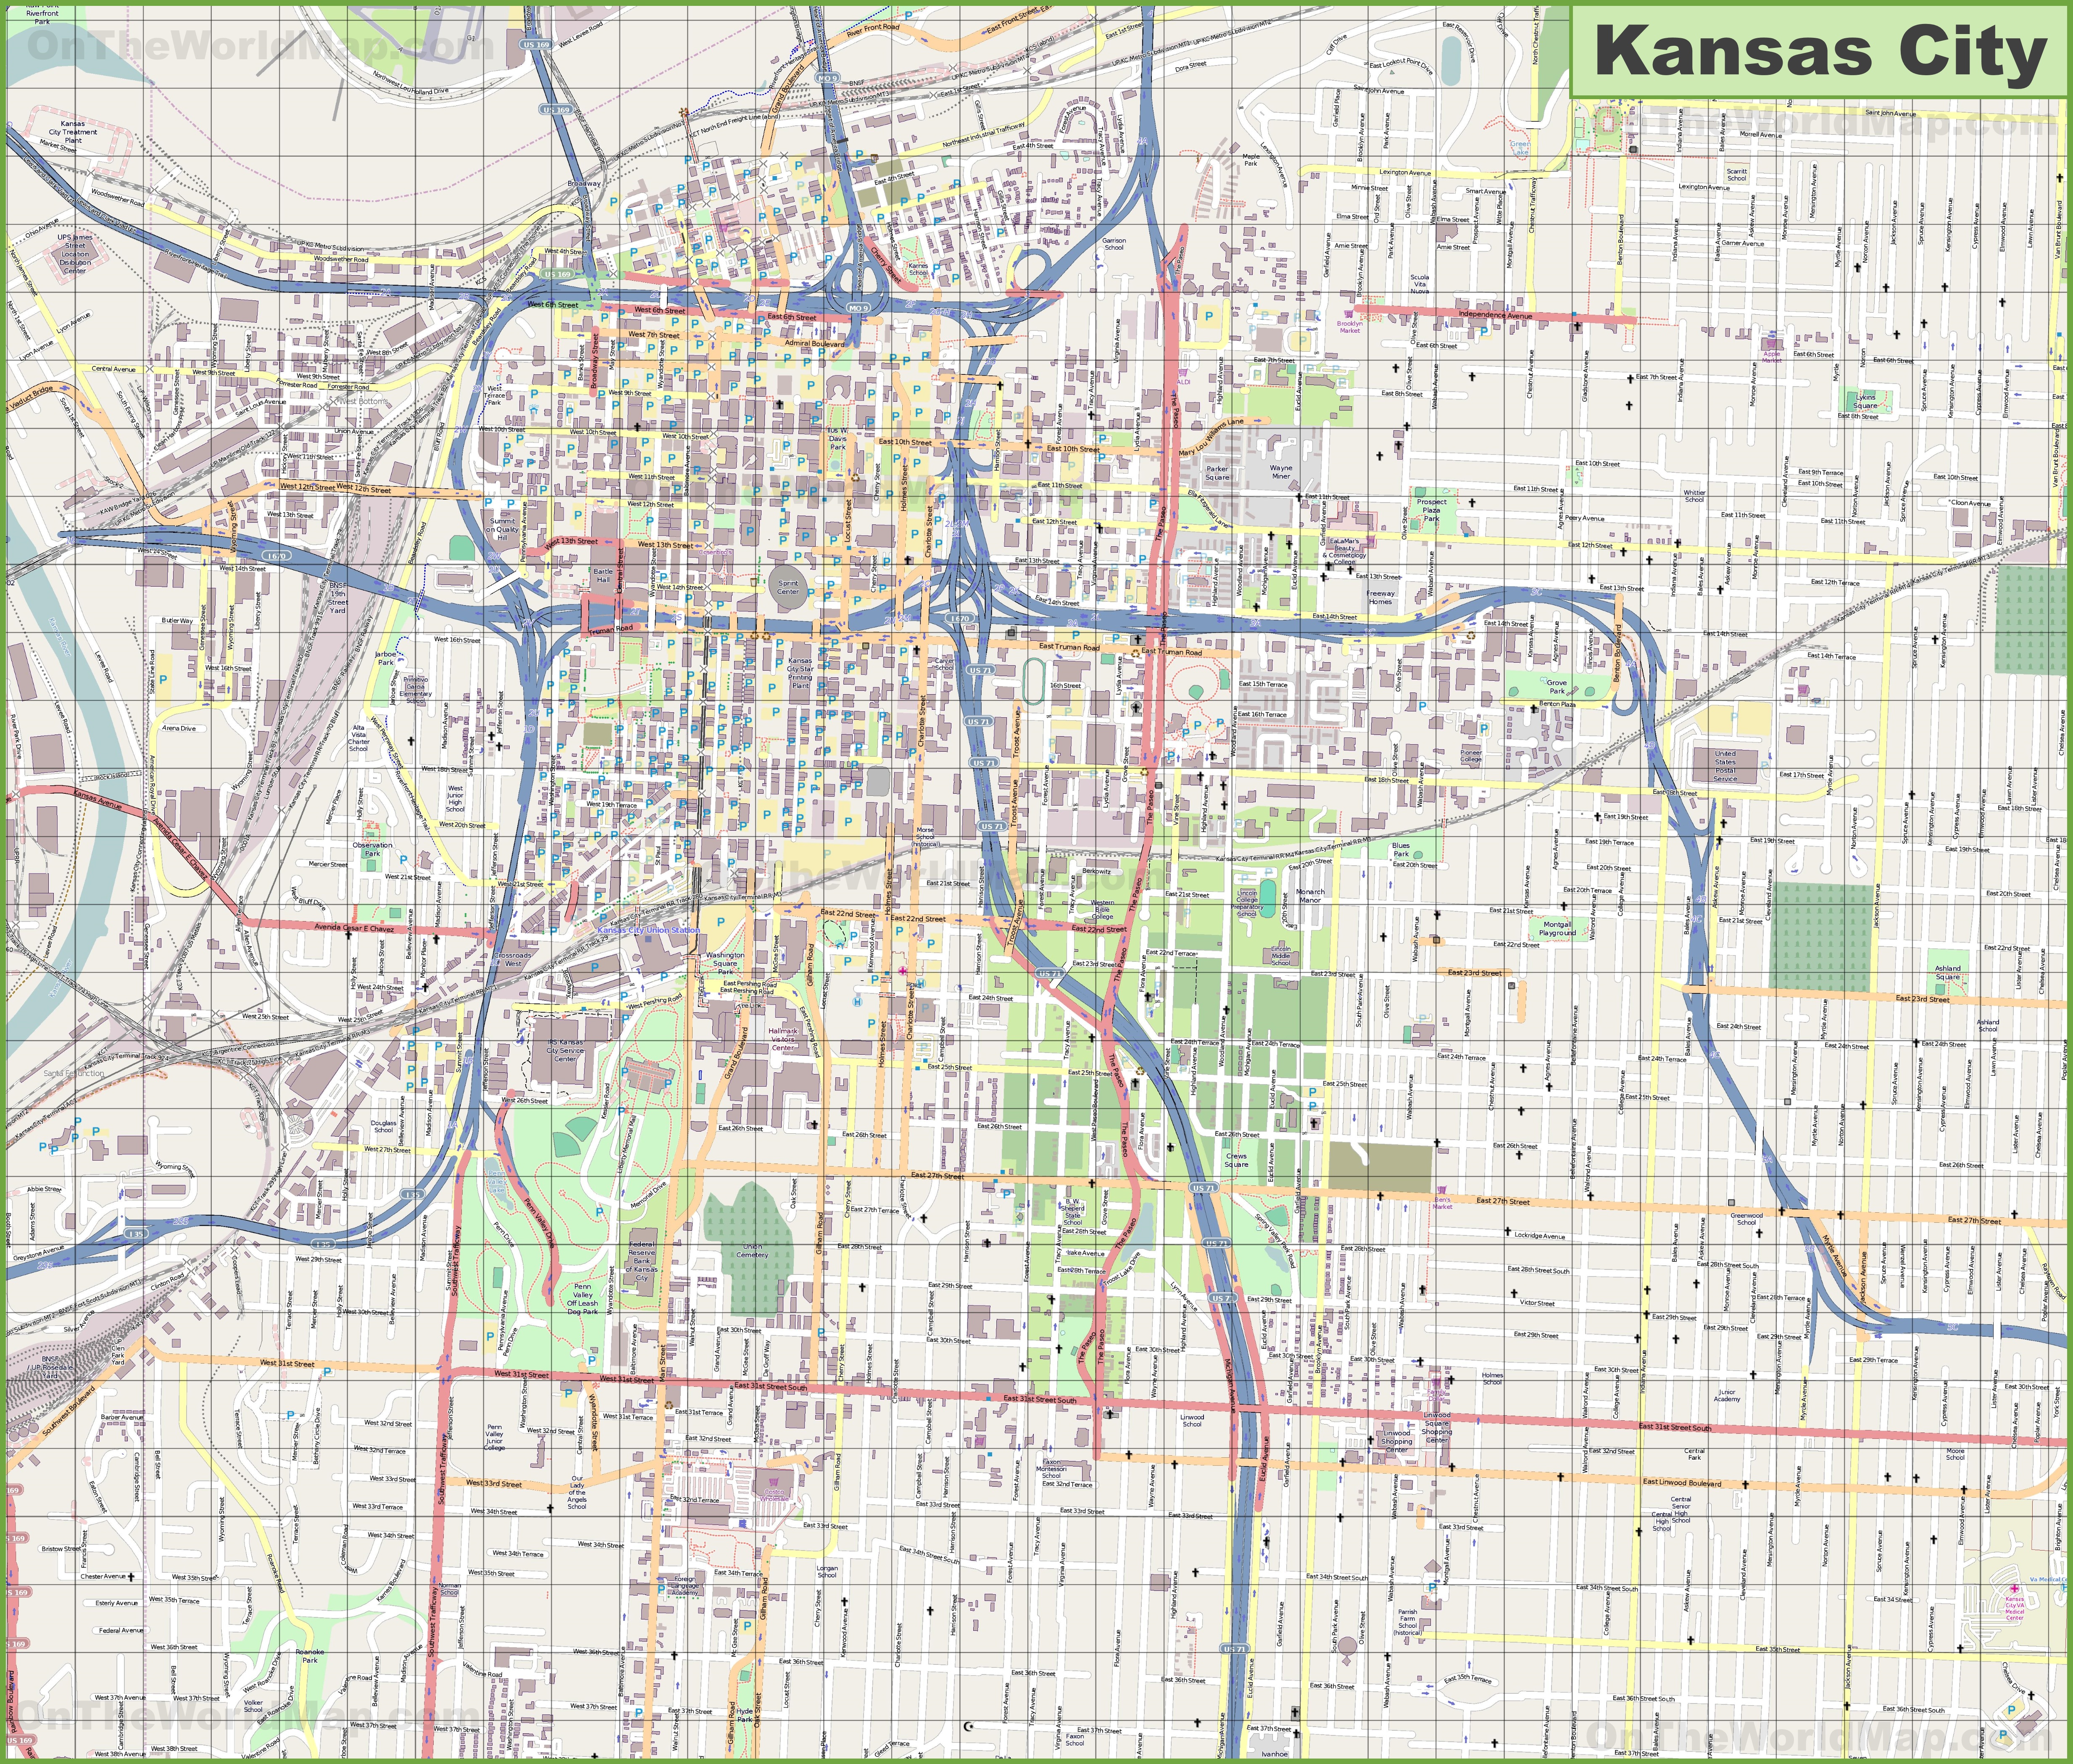 Kansas City Road Conditions Map World Map 10660 | The Best Porn Website